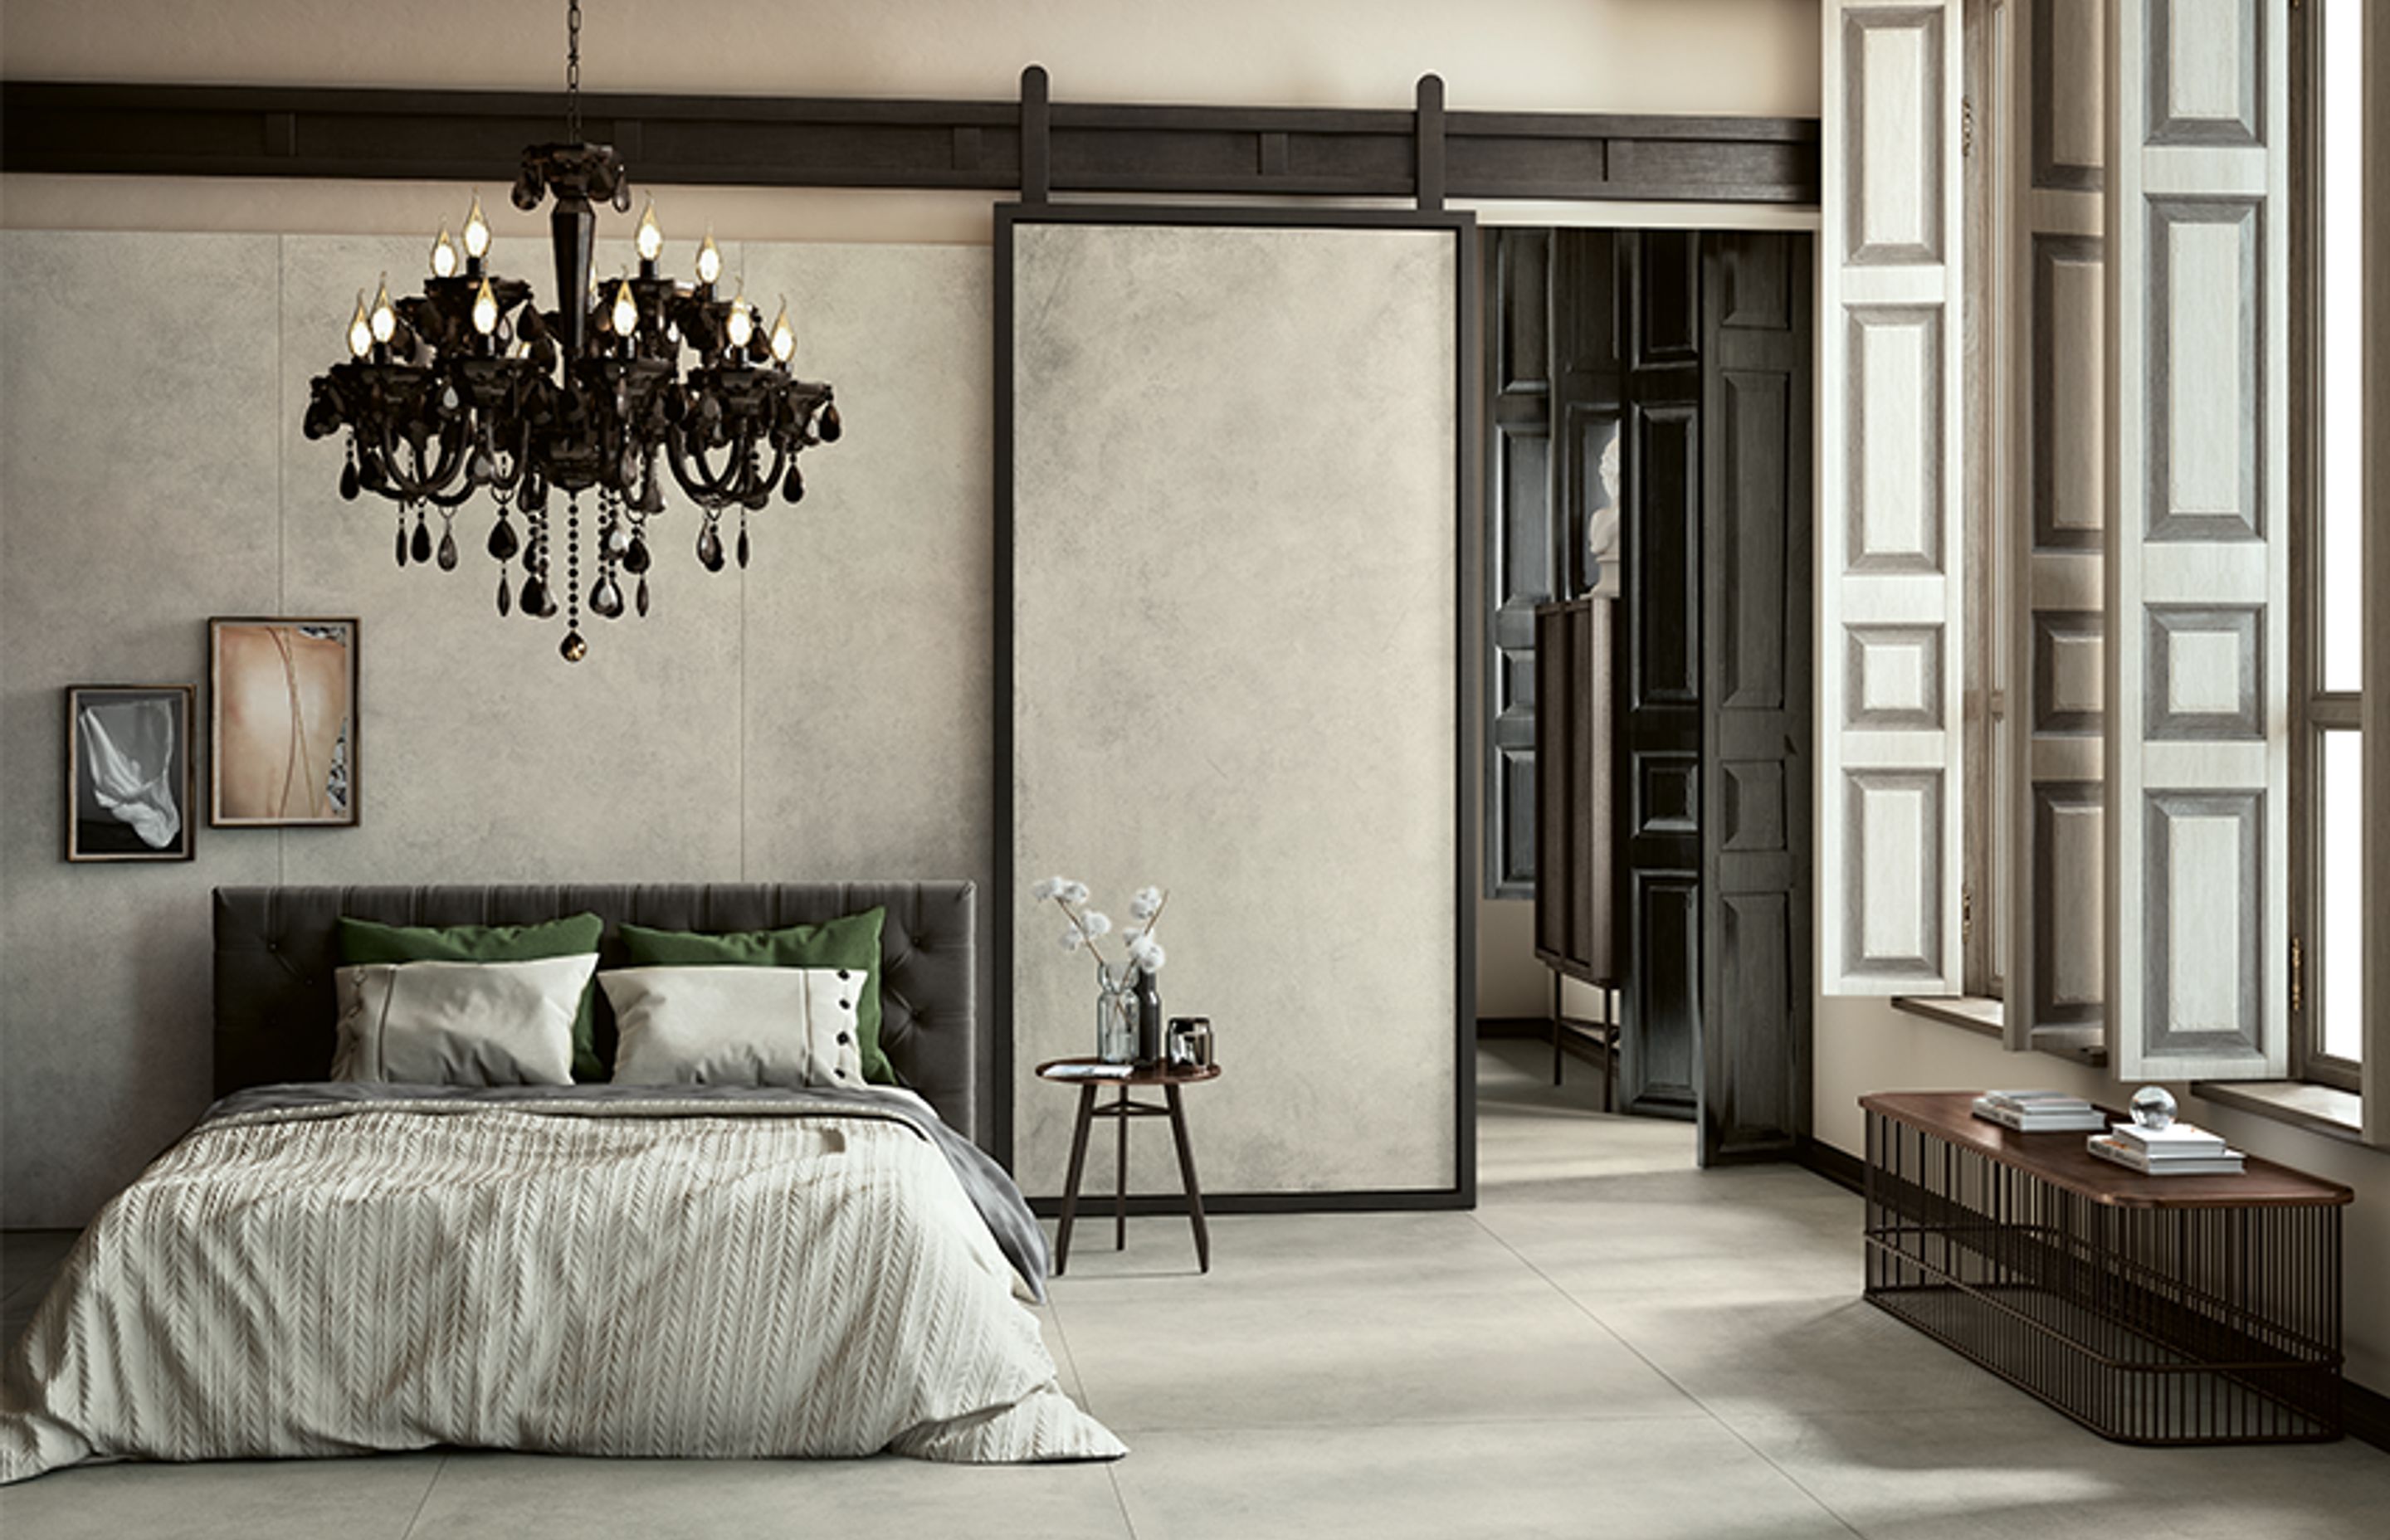 Add a whole new dimension to your bedroom interior with a selection of large-format porcelain stoneware floor and wall tiles.